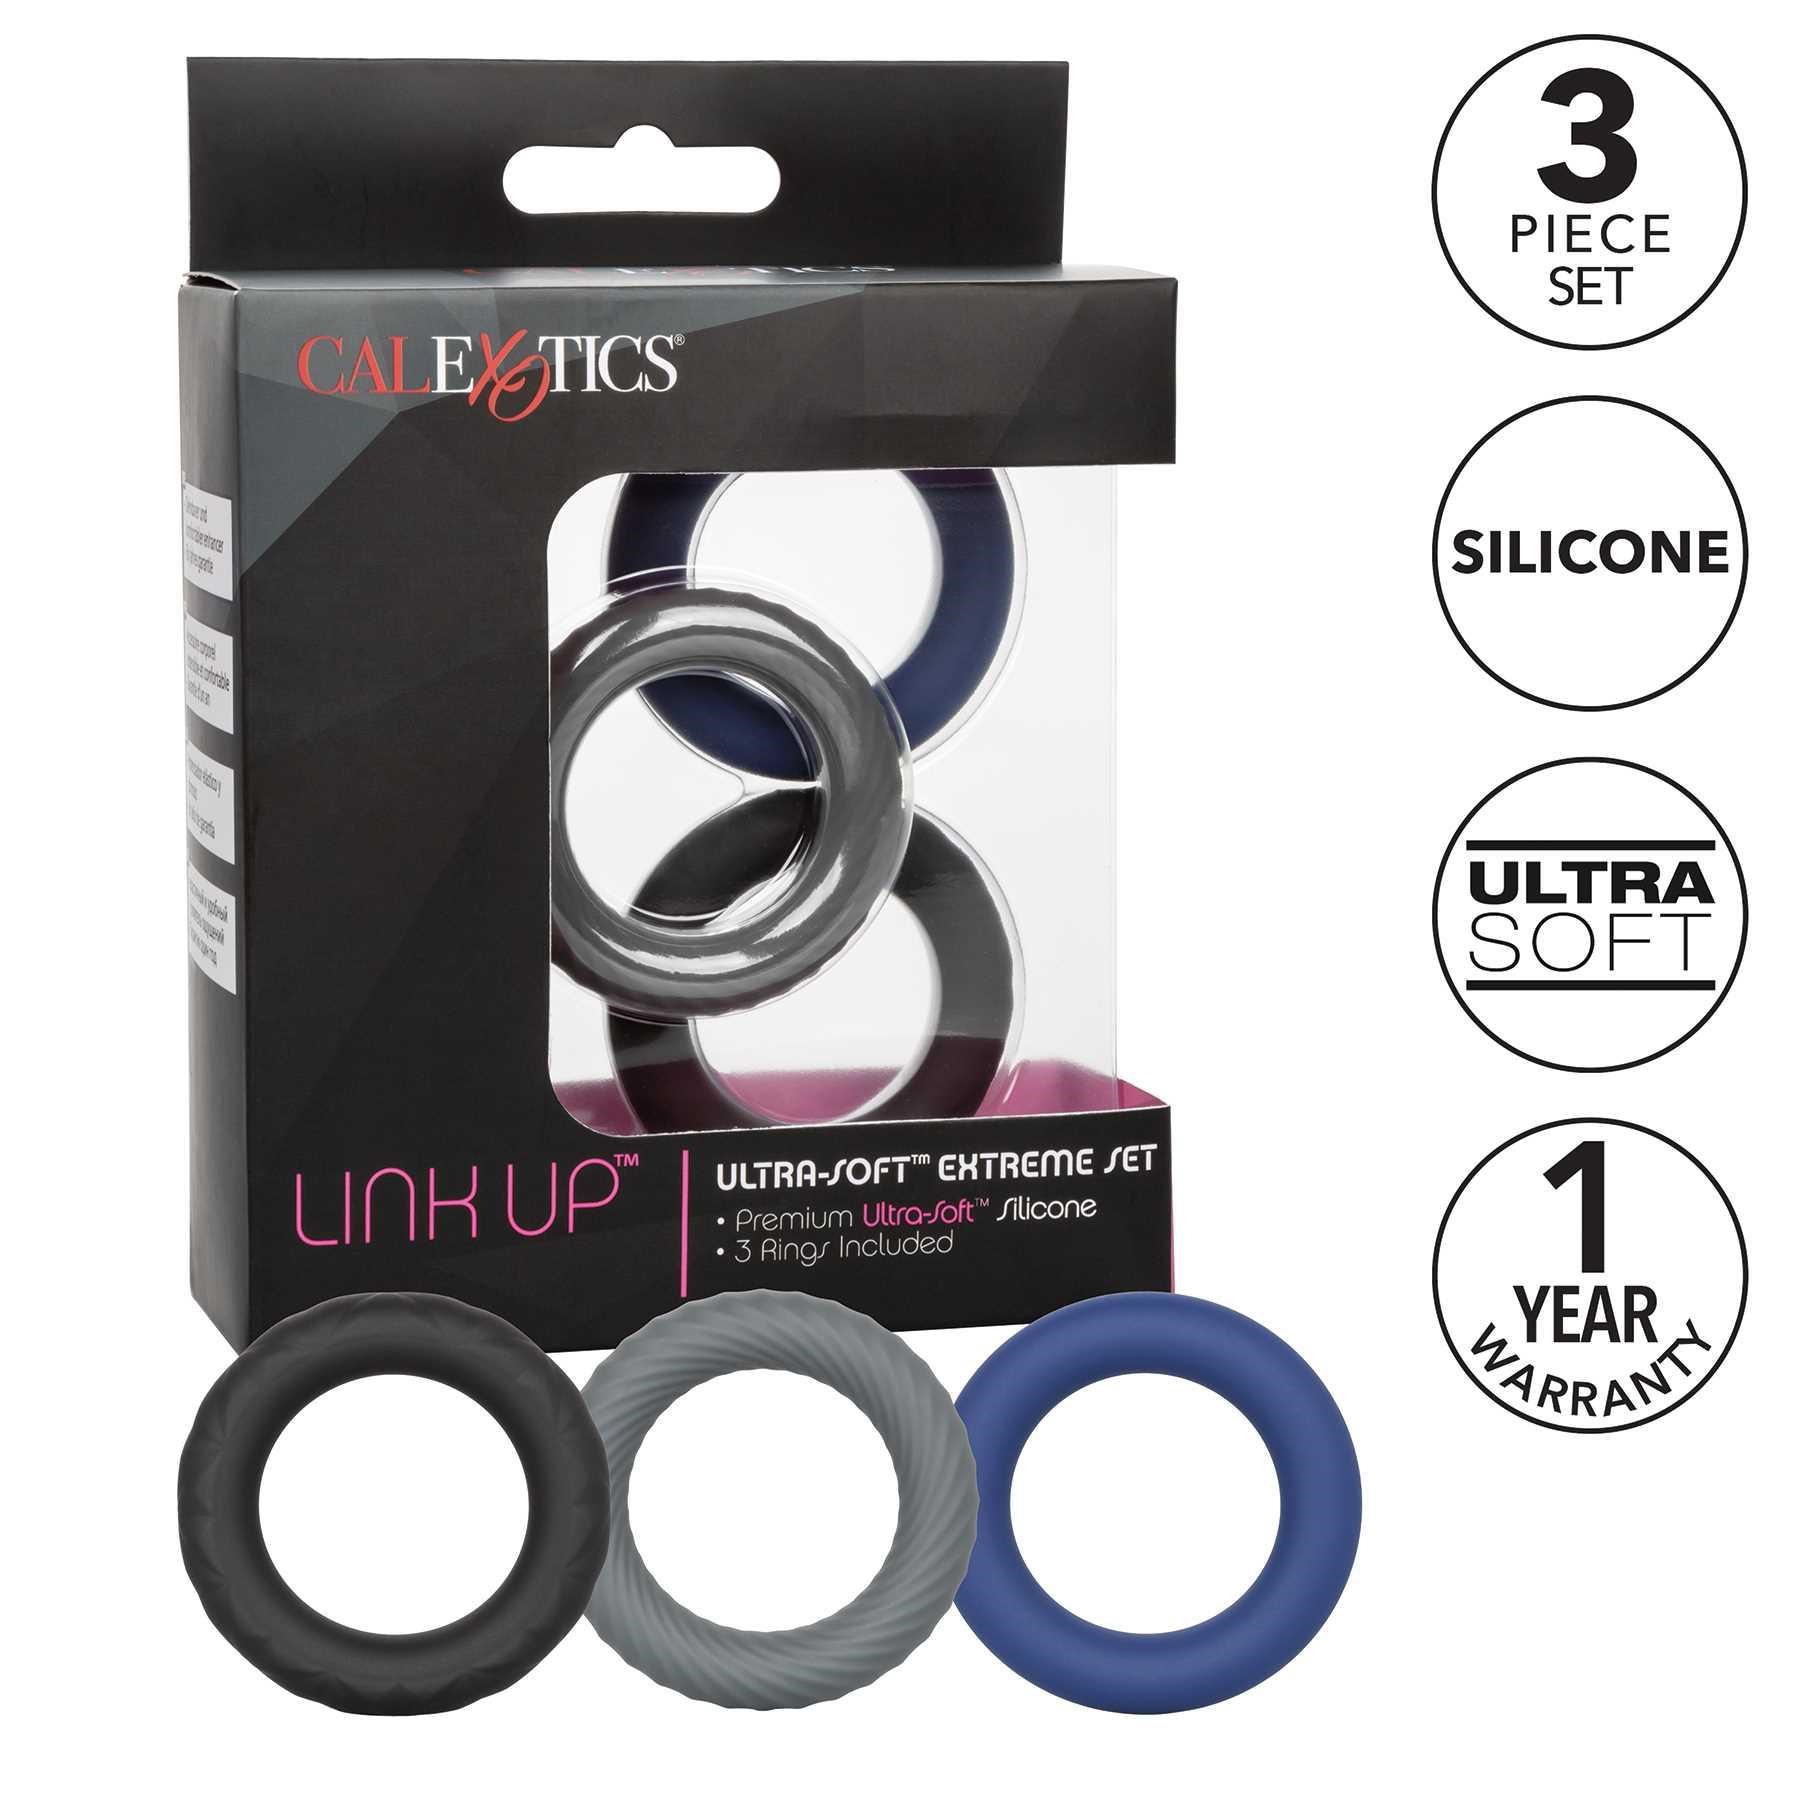 Link Up Ultra-Soft Extreme Set with product feature listings and packaging